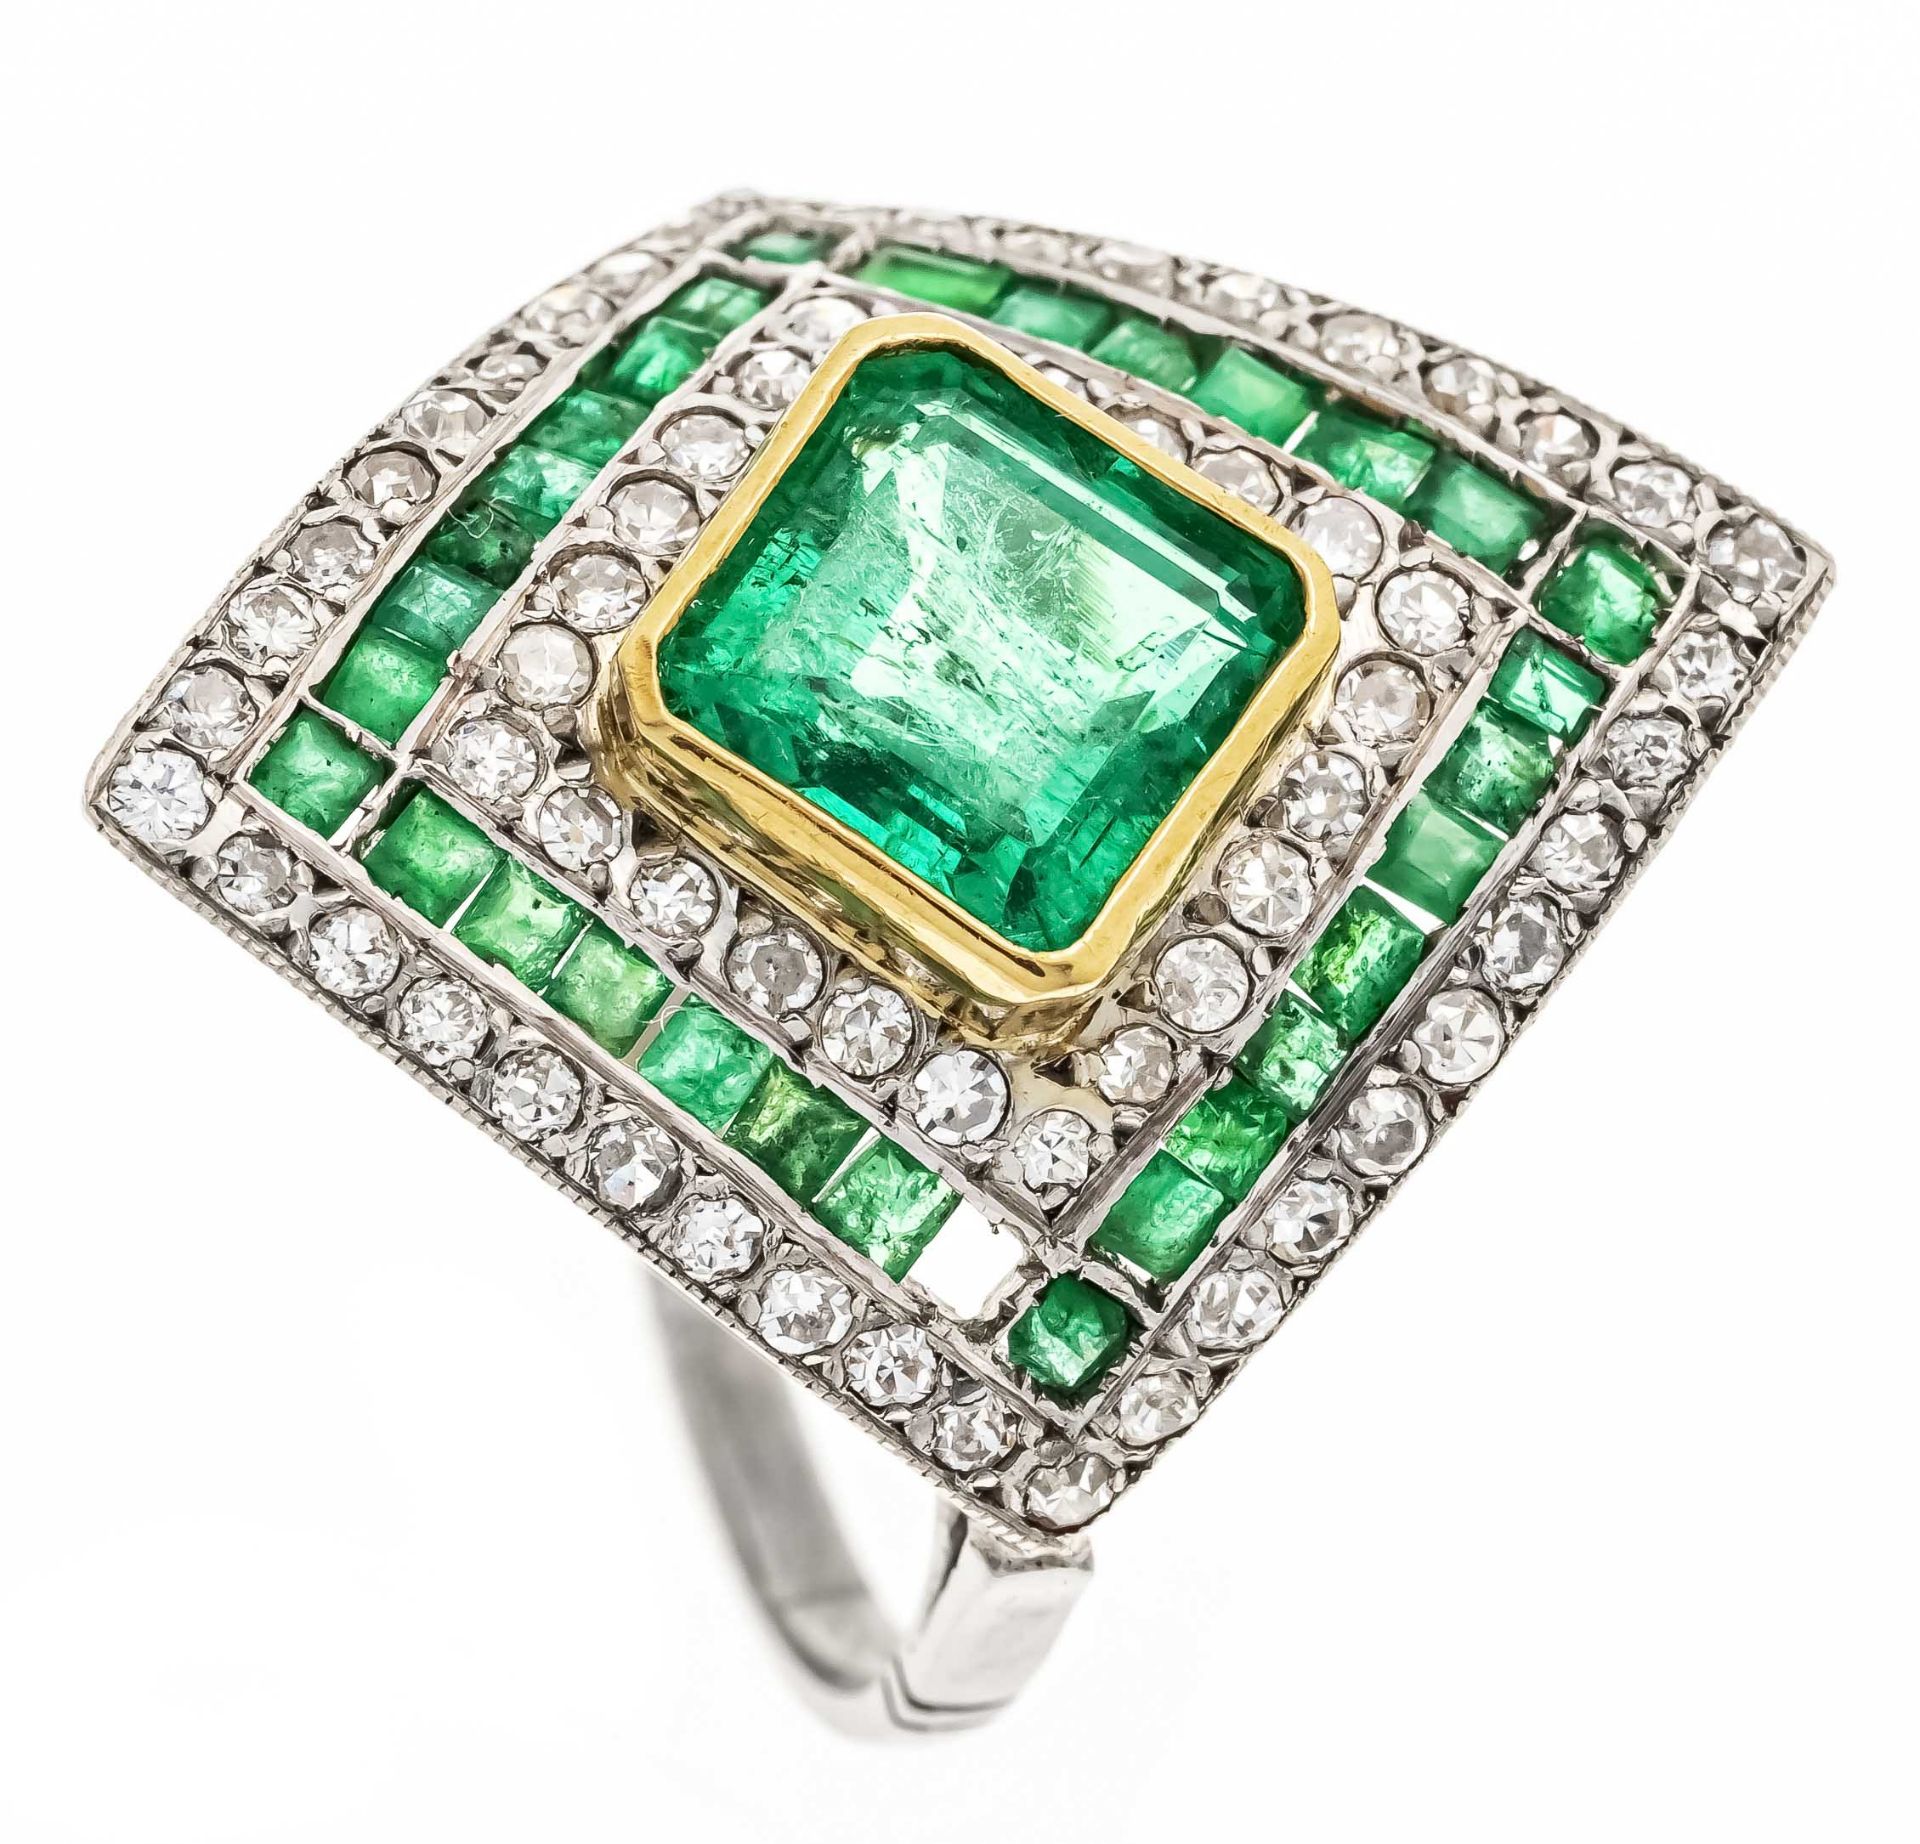 Art deco emerald old cut diamond ring platinum 950/000 and yellow gold with one very good carré